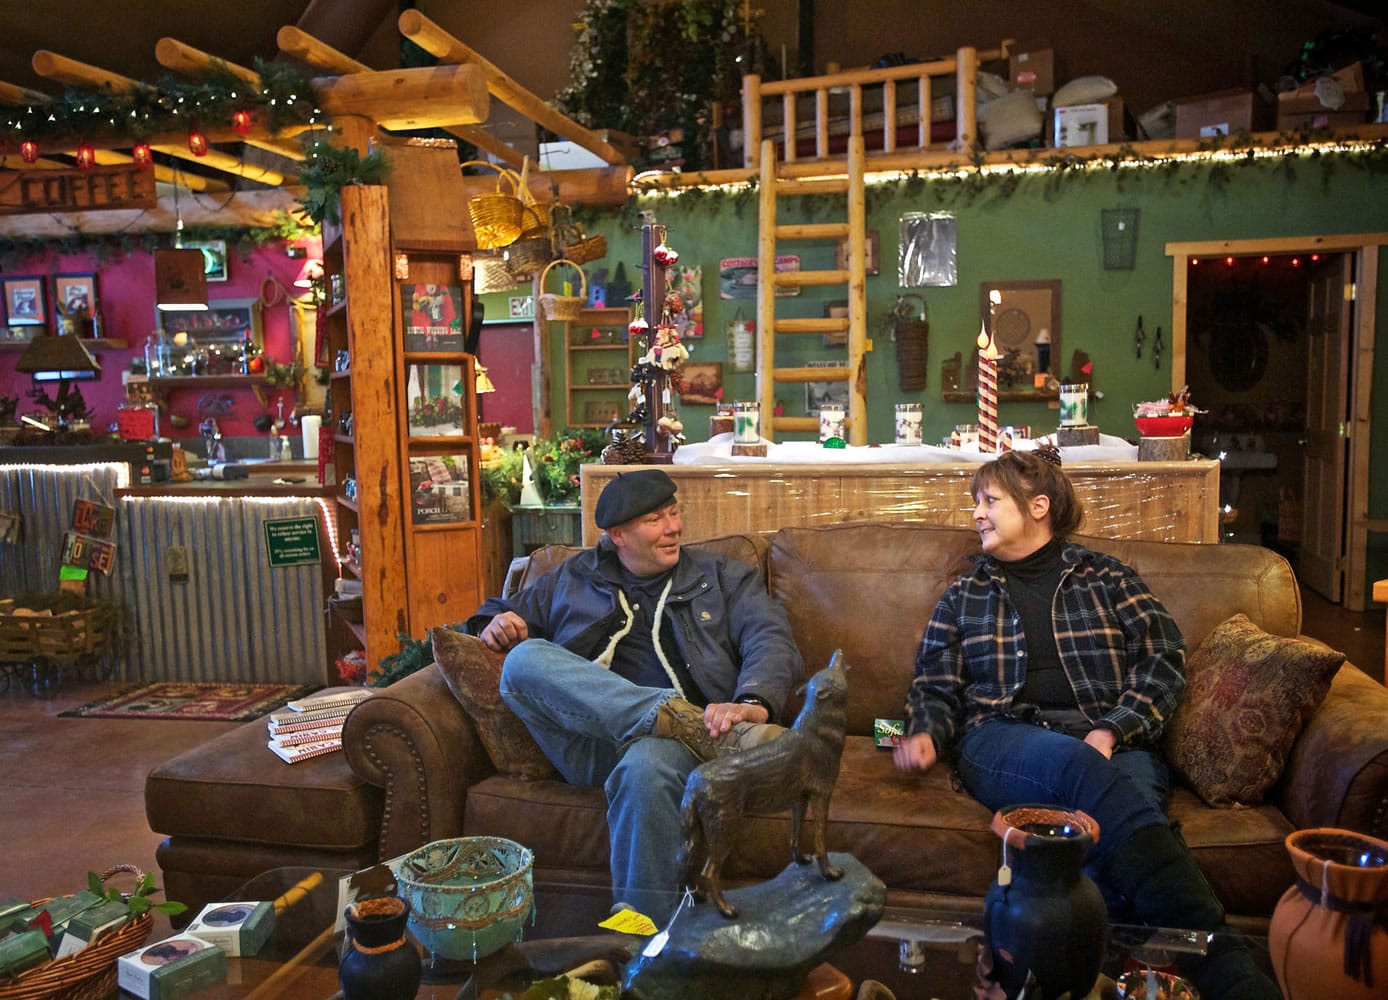 Buddy Carr Jr. and Donna Bergeron talk Dec. 11 at her log furniture shop in Kalama. Bergeron decided to help out the homeless man with food and nights at a Woodland motel after she learned he'd been sleeping under a nearby bridge. Her brother, who she hasn't heard from in 10 years, is also homeless and the issue touches her deeply.